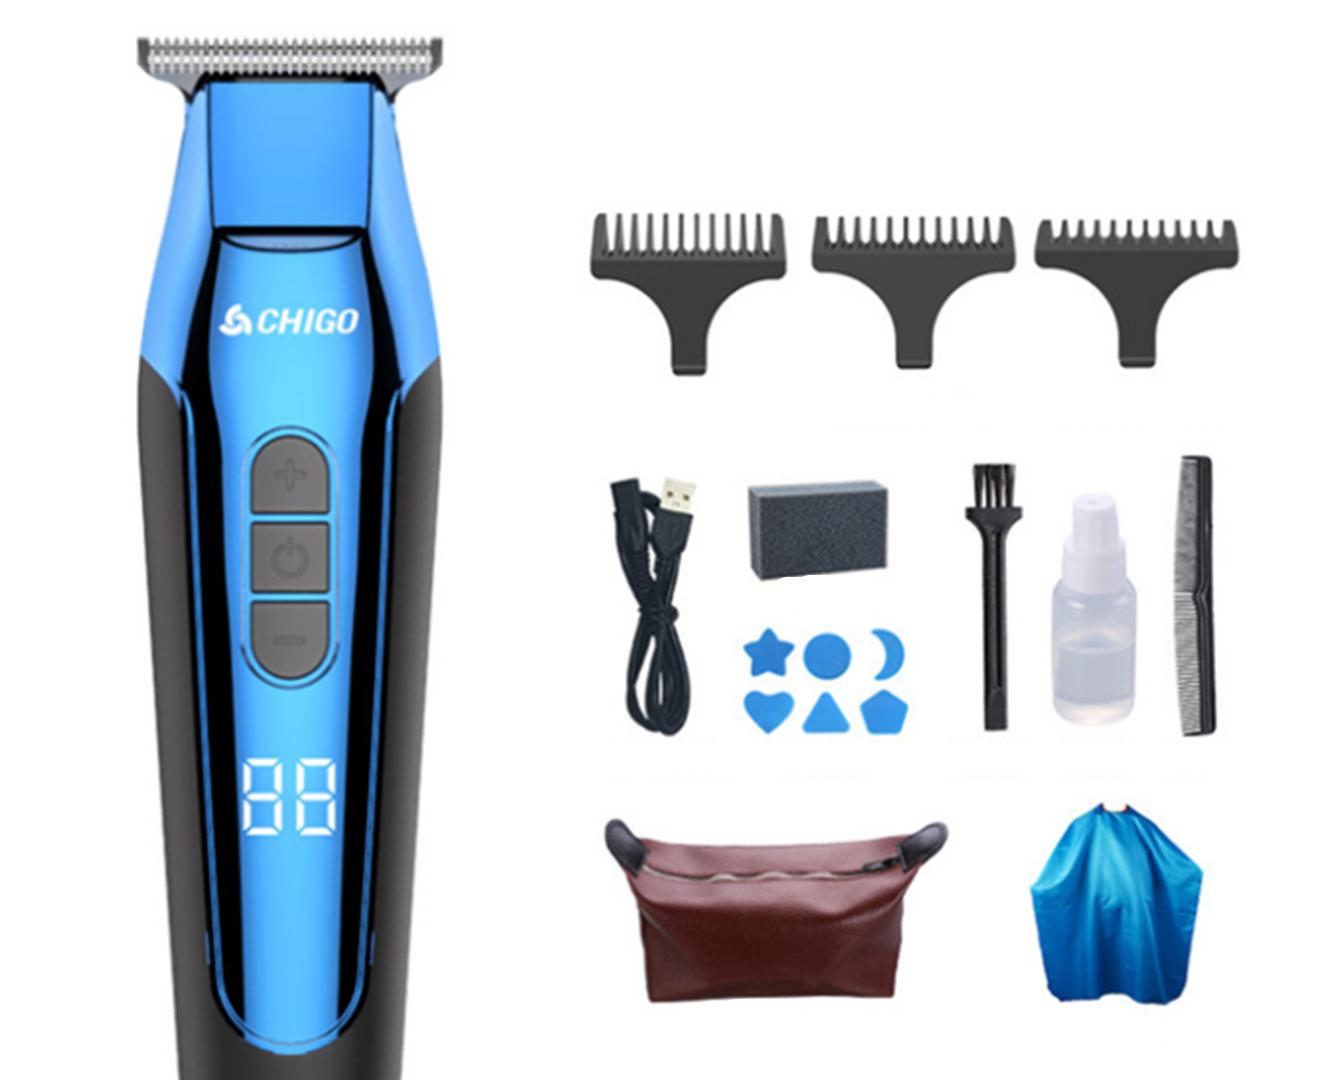 Rechargeable Cordless Electric Hair Trimmer Hair Clippers Multi-Purpose Haircut Hair Cutting Kit-Blue